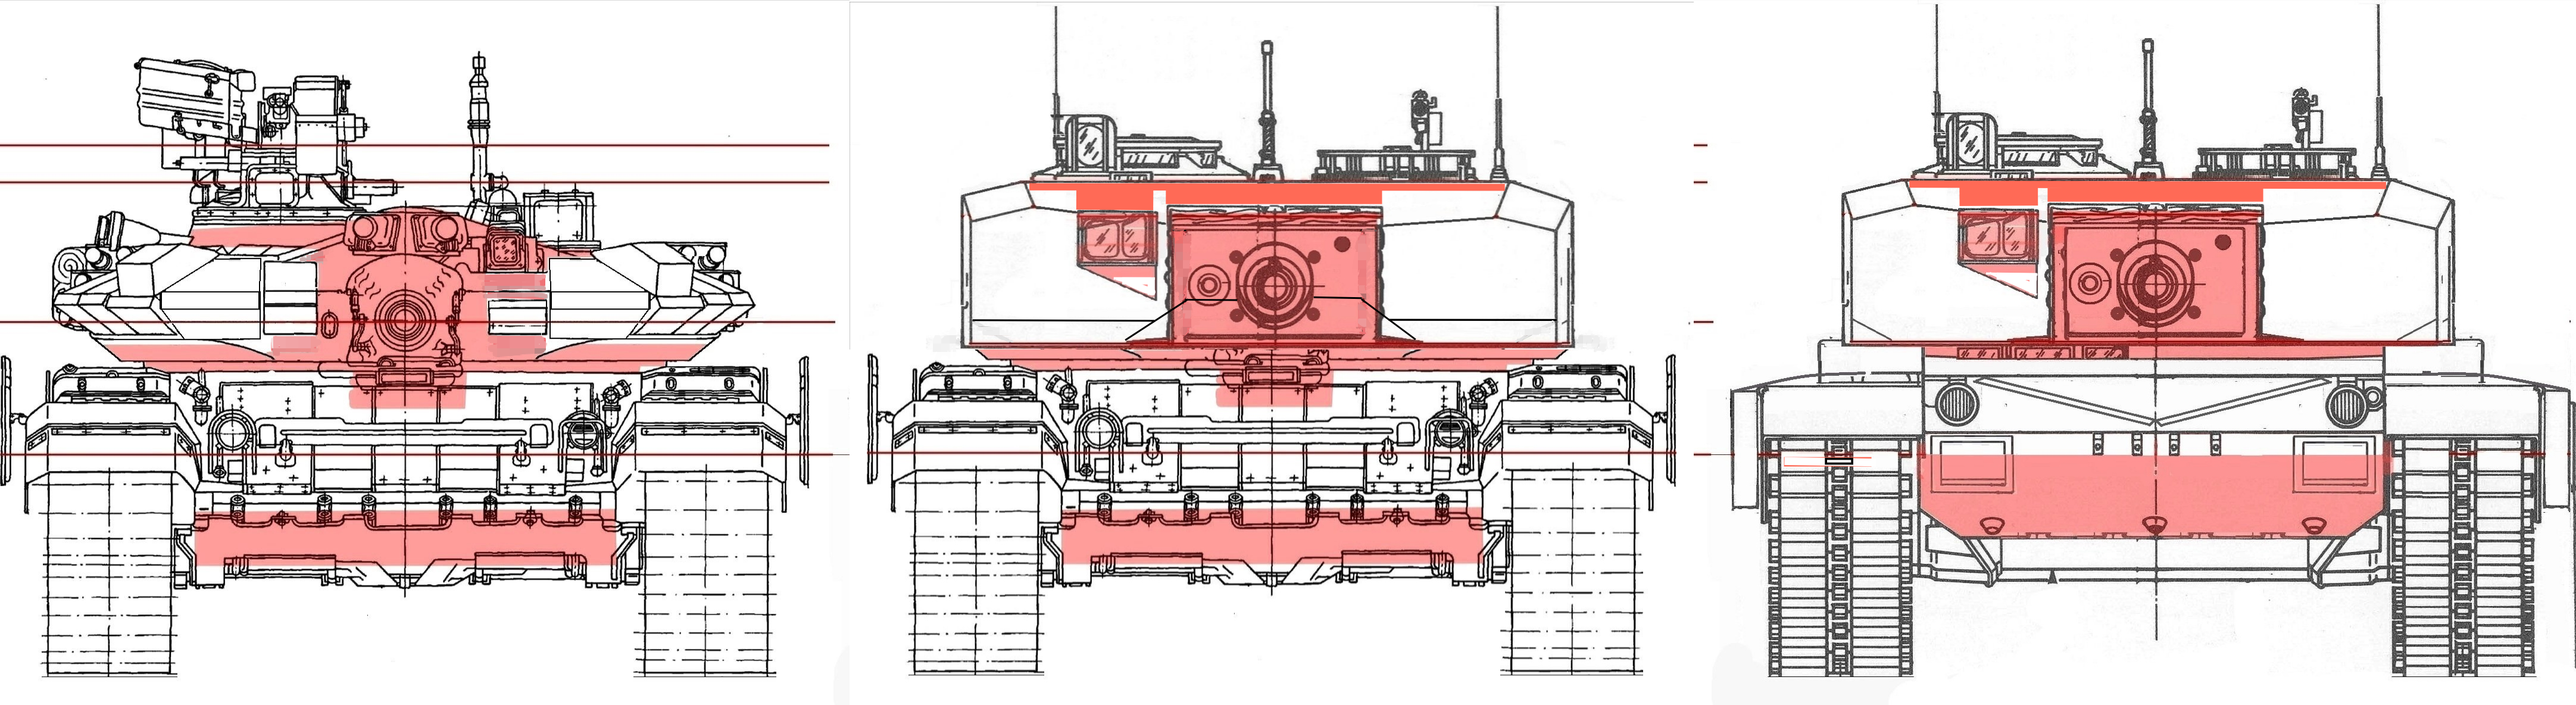 Arjun vs T-90 armour thickness.png